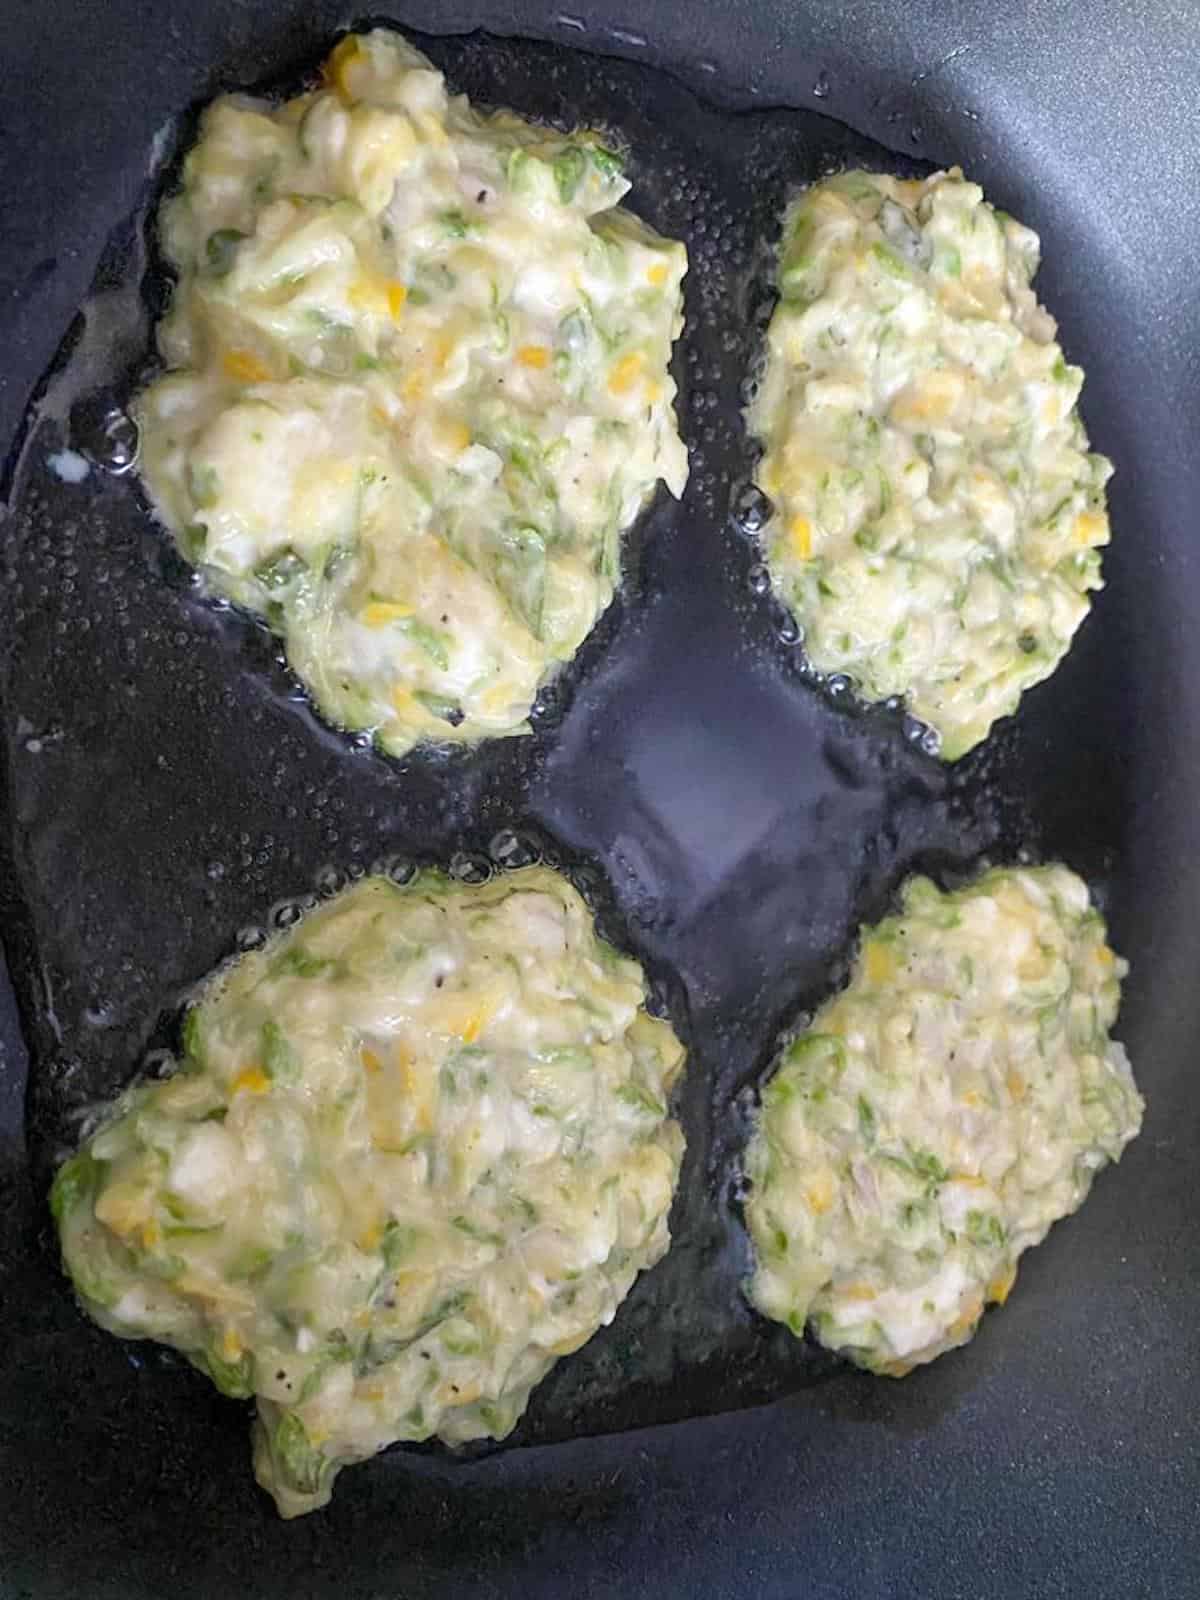 frying the courgette feta fritters in oil 